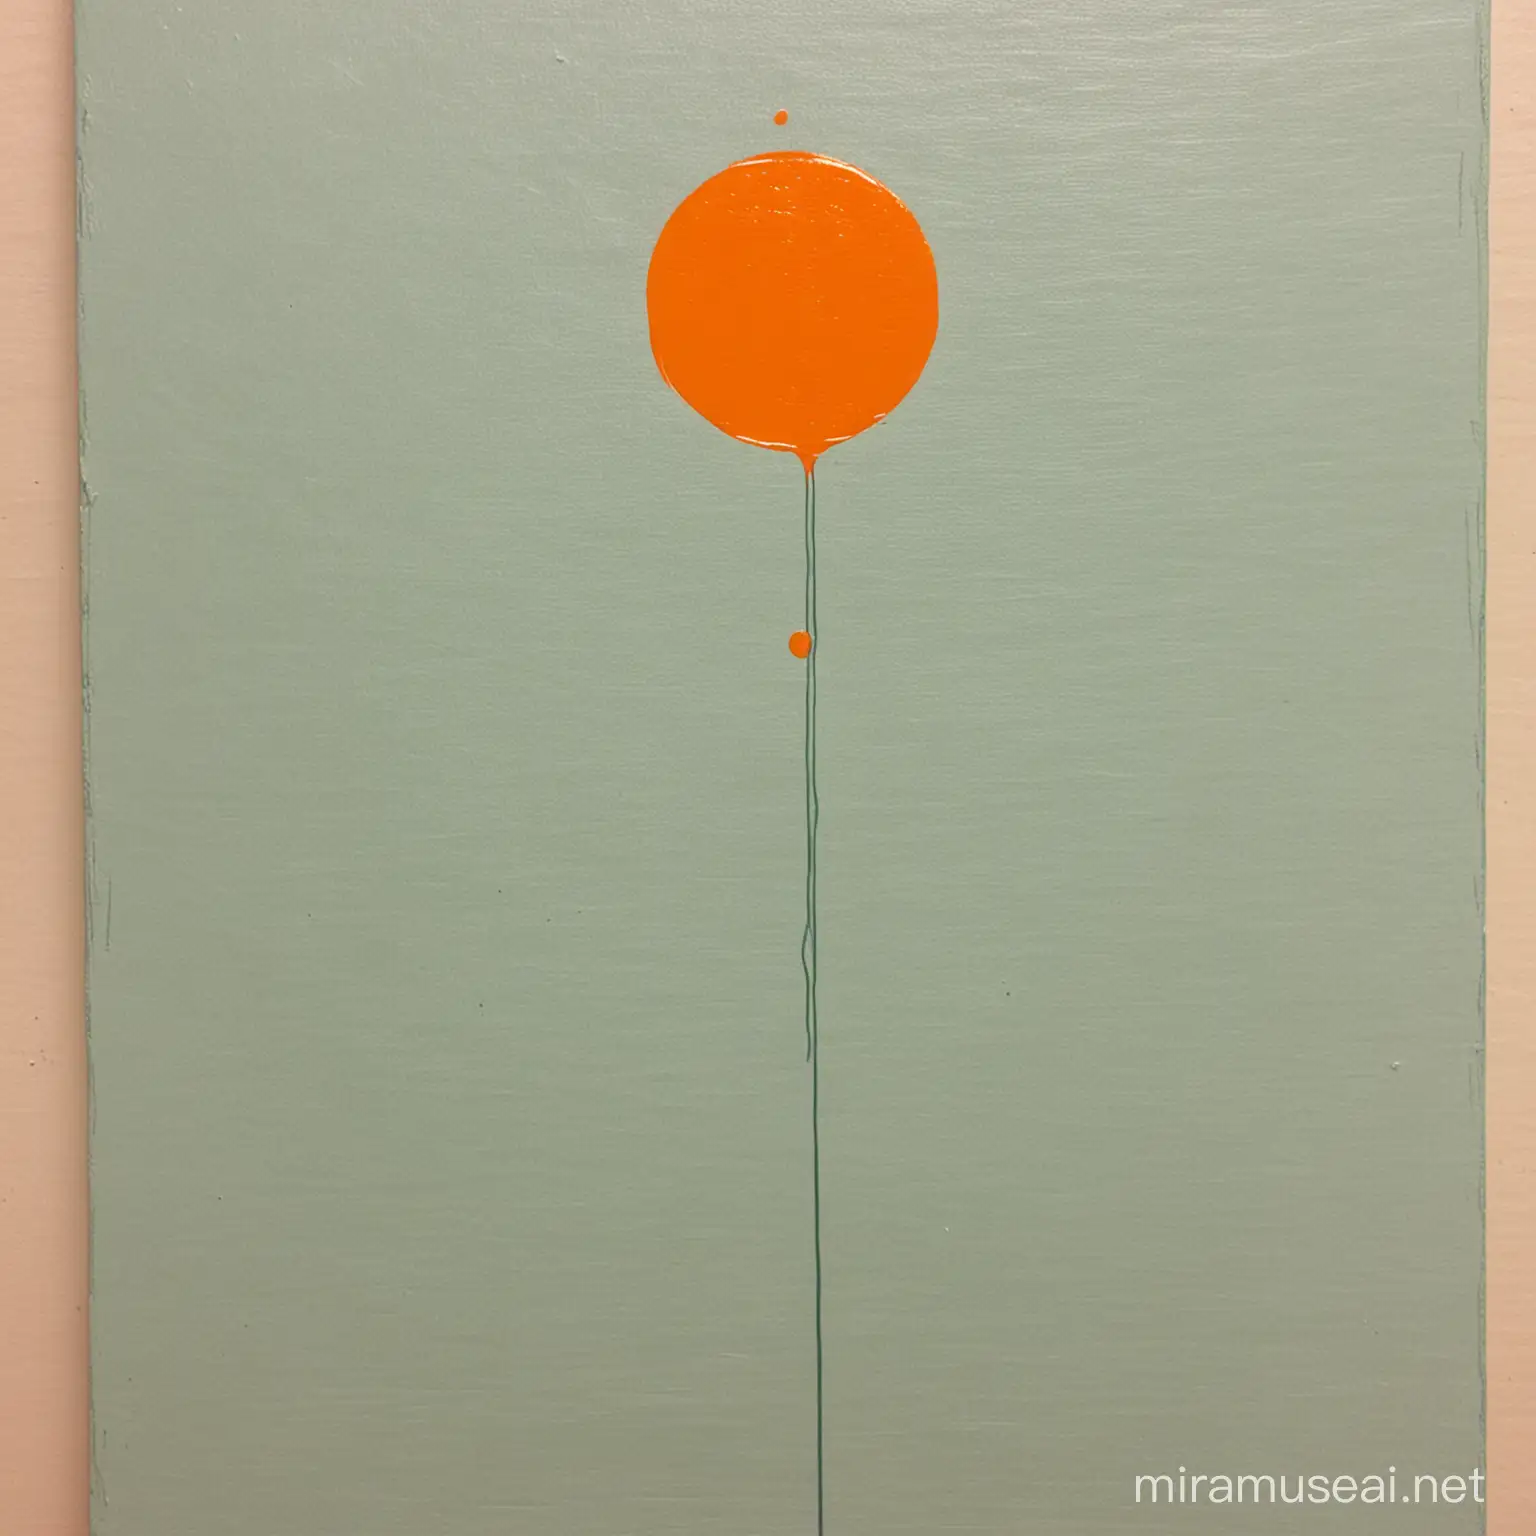 just a paint brush's line . vertical and in pastel Greene . only one vertical  line maybe a second one, on a canvas. with one orange circle drop. no shiny look please
